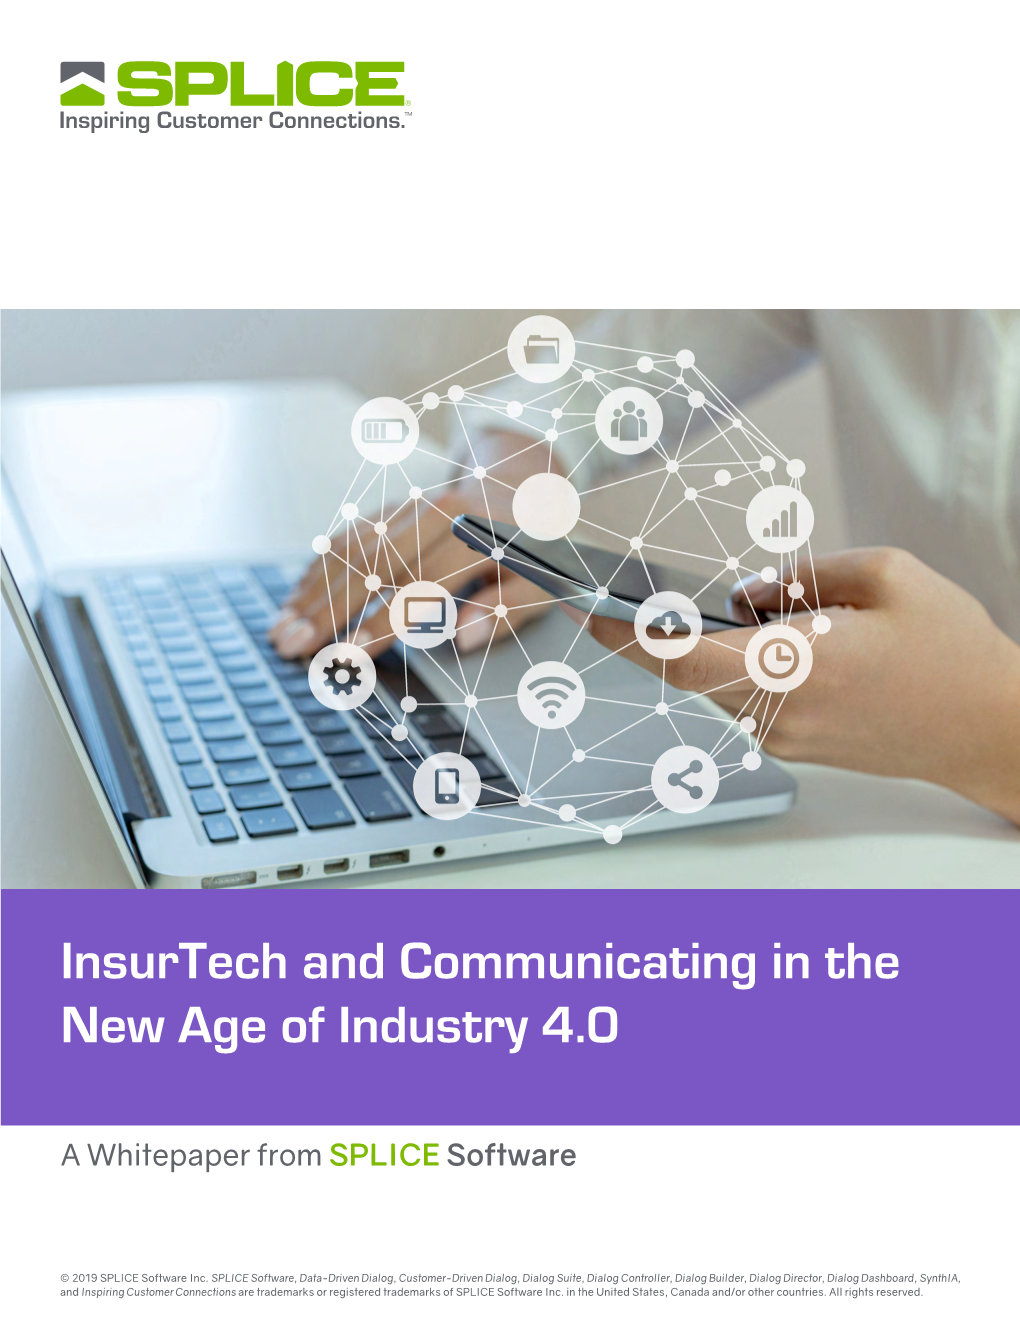 Insurtech and Communicating in the New Age of Industry 4.0